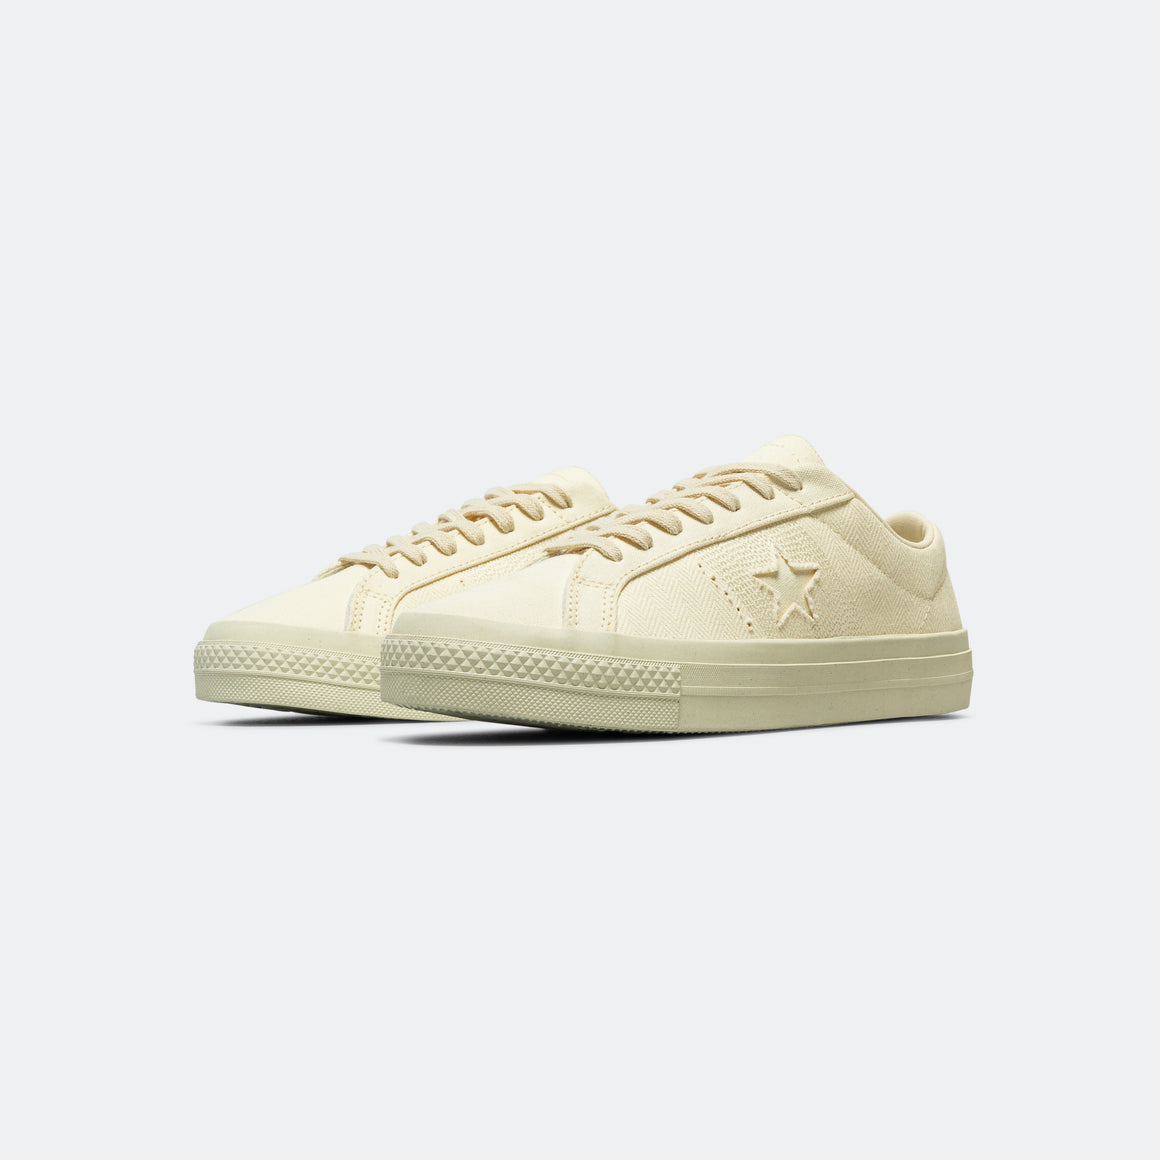 Converse - One Star Low Pro - Mums Potato Salad/Egret - UP THERE